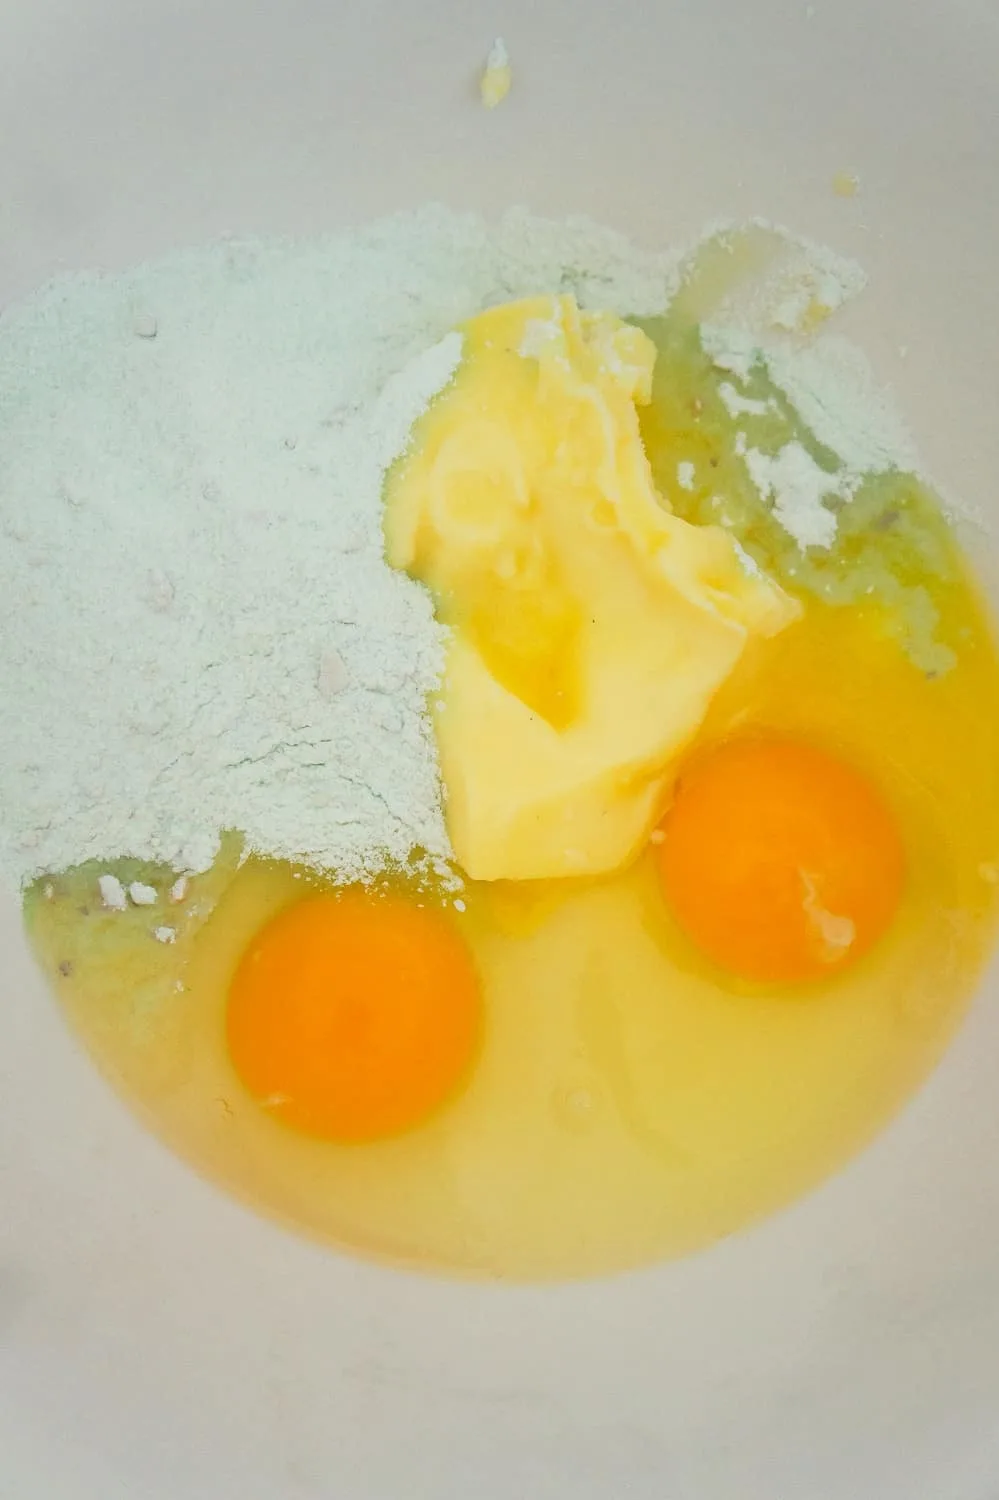 eggs, softened butter and pistachio pudding mix in a mixing bowl